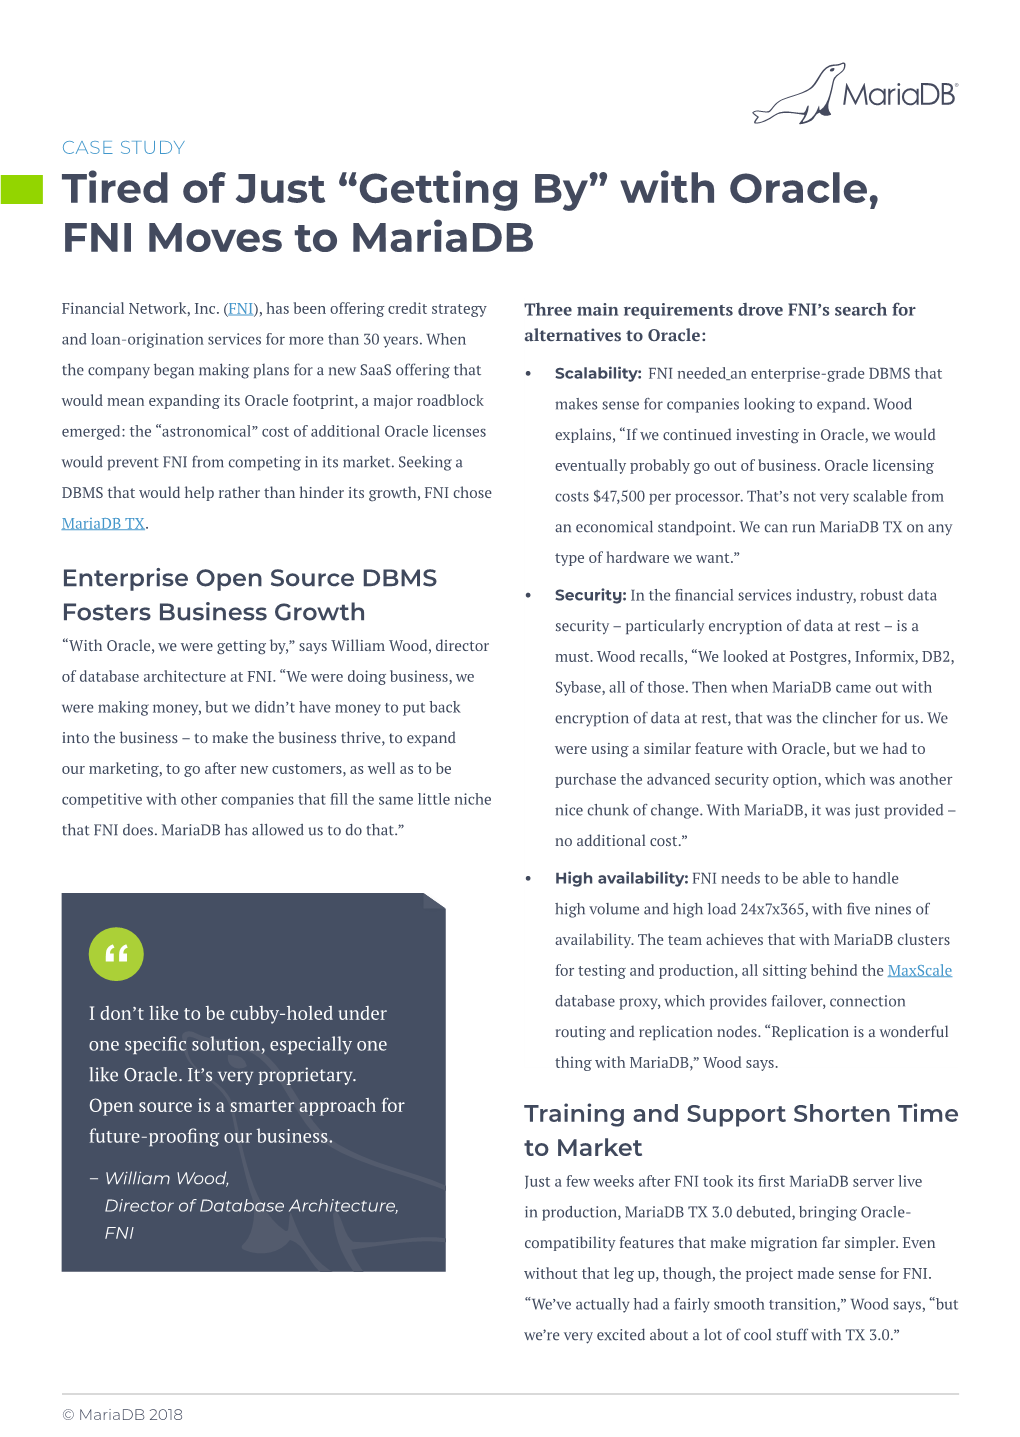 Tired of Just “Getting By” with Oracle, FNI Moves to Mariadb